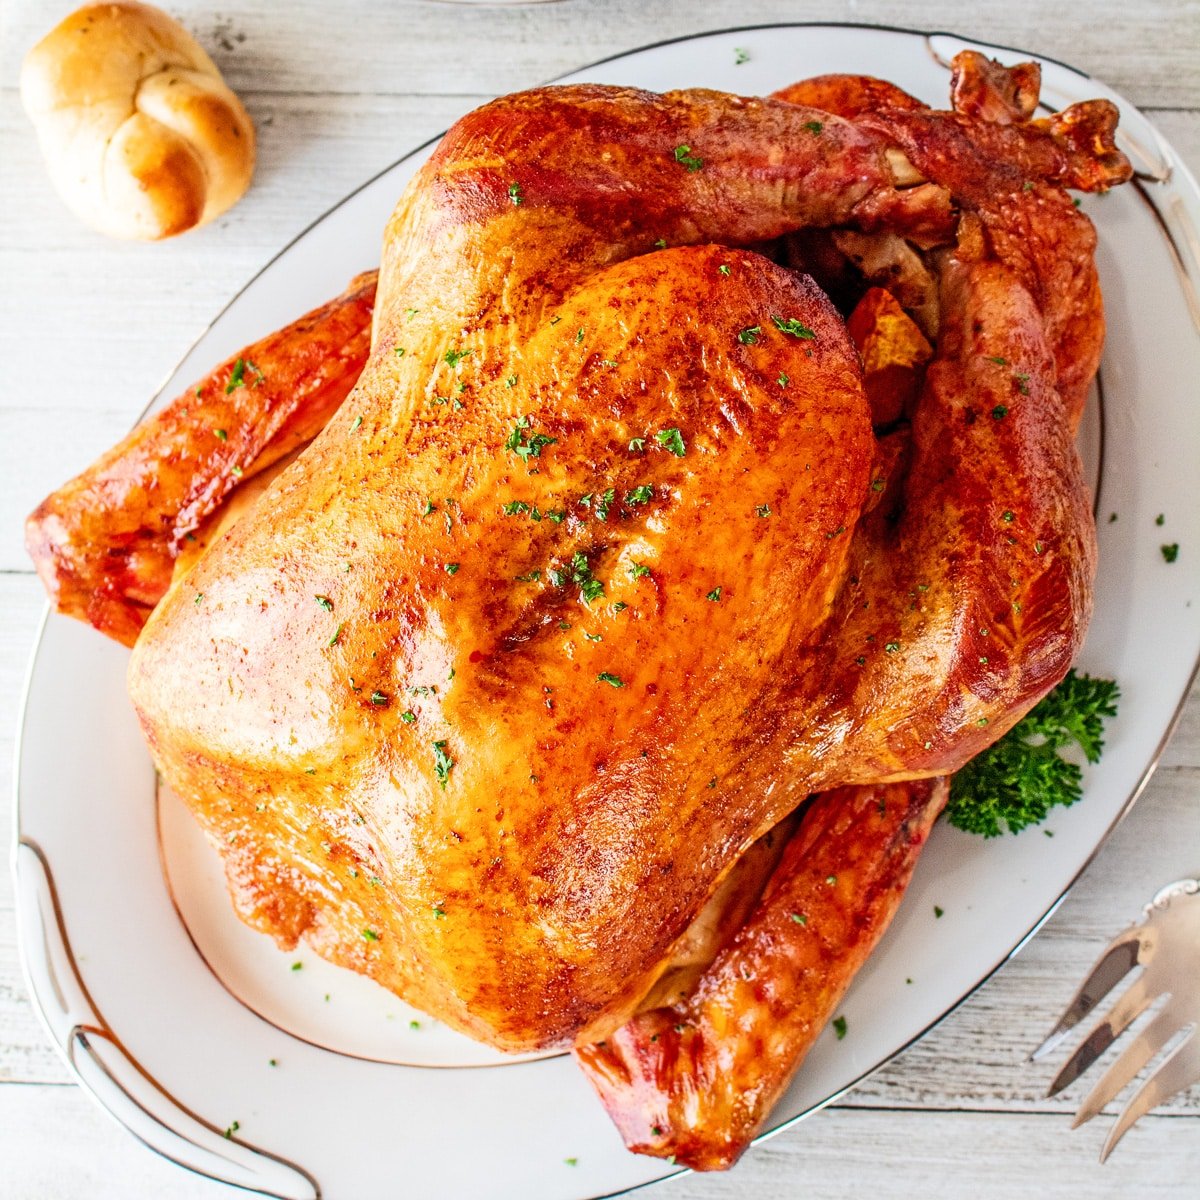 https://bakeitwithlove.com/wp-content/uploads/2019/11/Oven-Roasted-Turkey-sq1.jpg